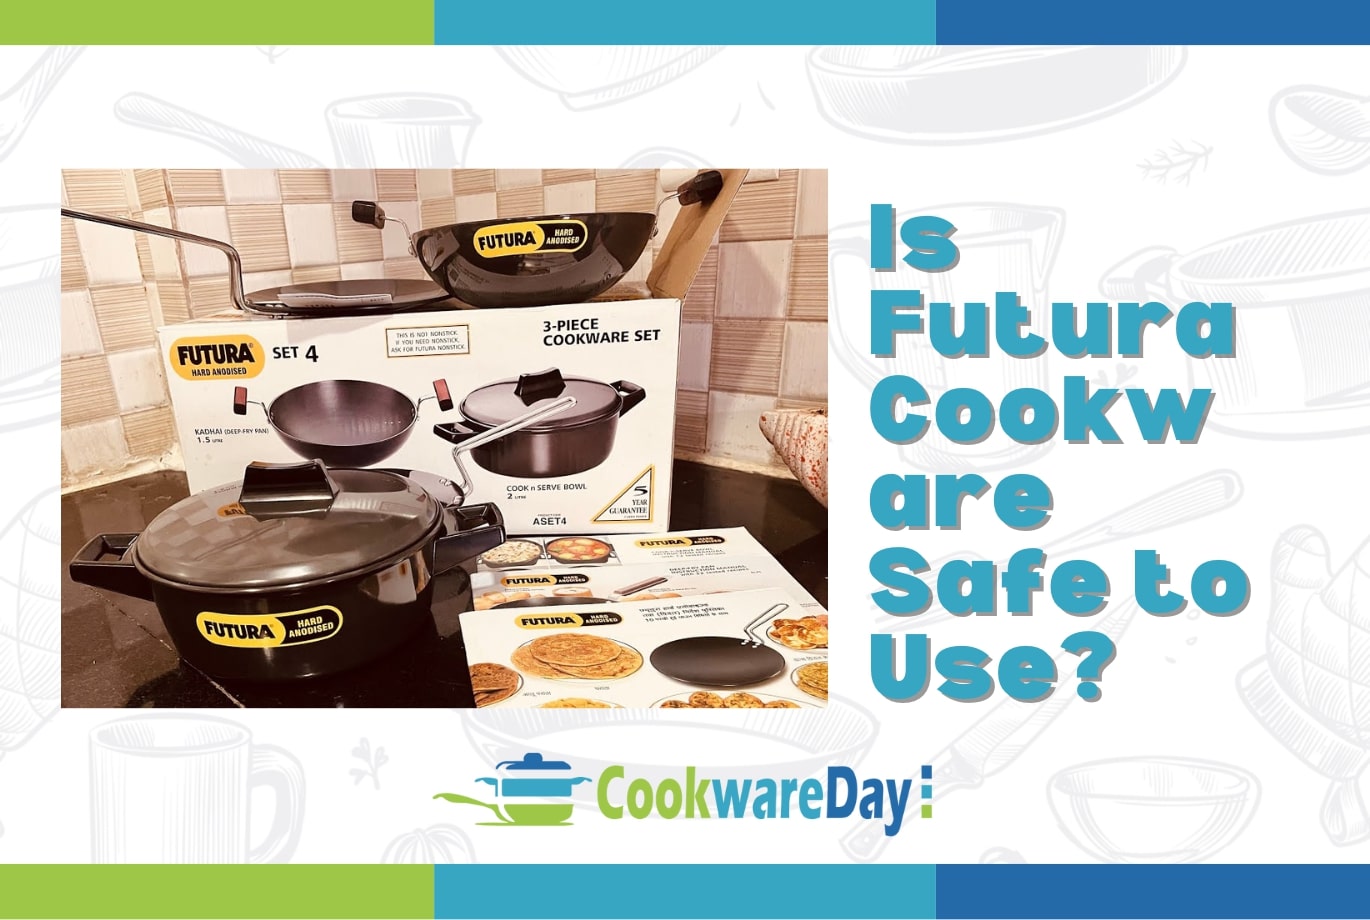 Is Futura Cookware Safe to Use? Truth Behind the Fact